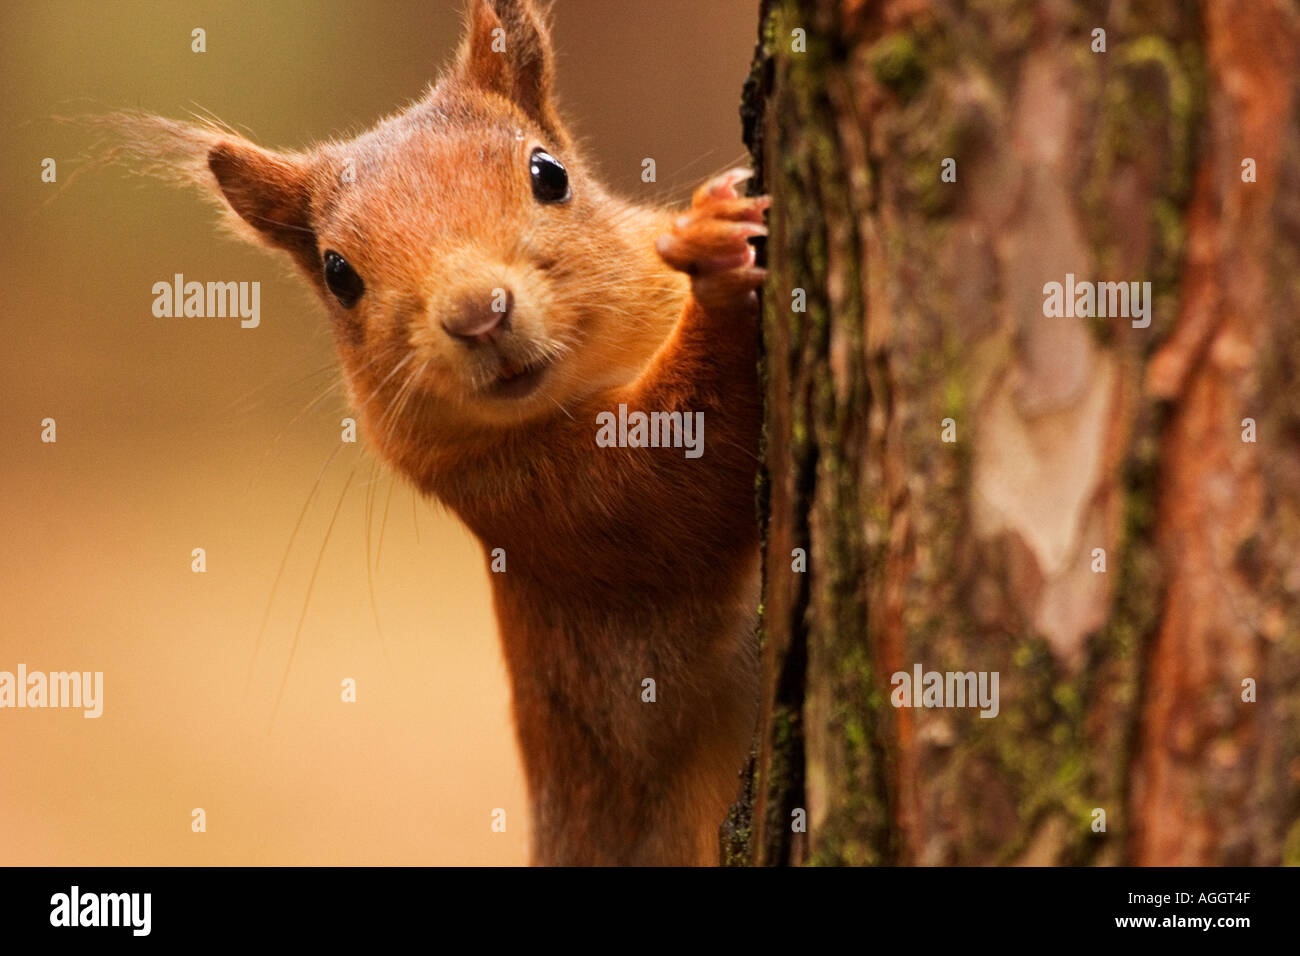 Red squirrel about to climb a tree Stock Photo